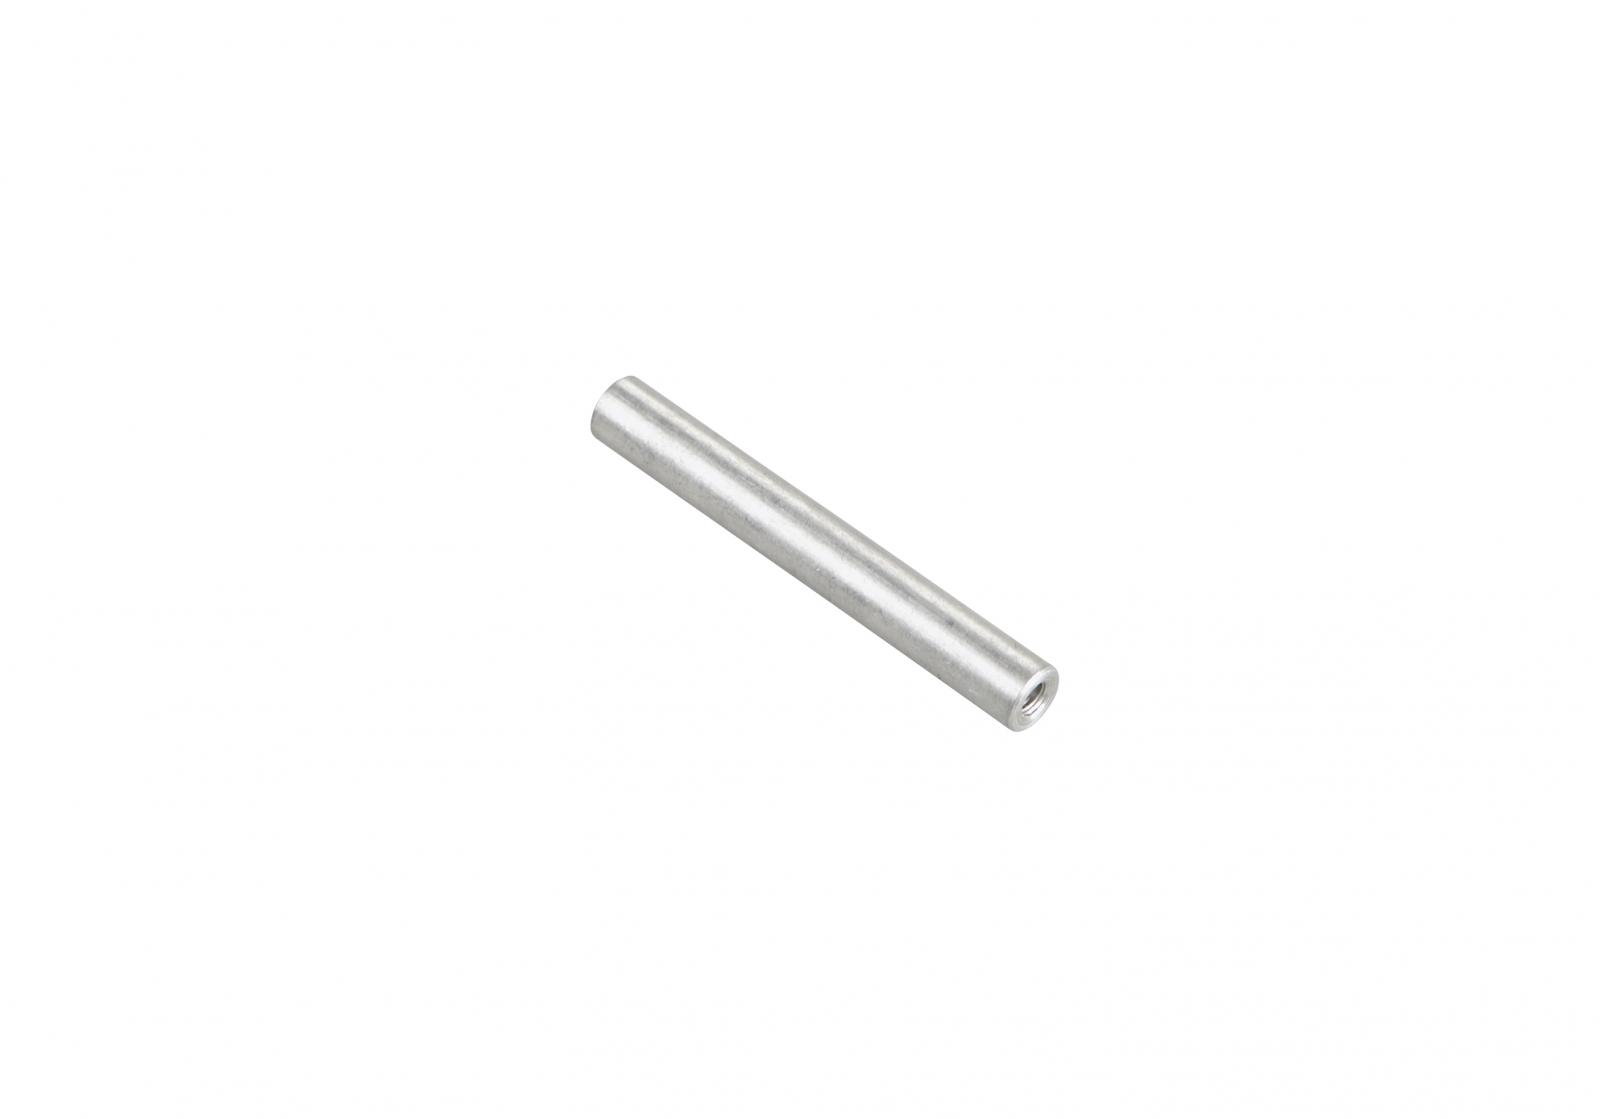 TapeTech® Creaser Spacer Bar. Part number 050023F